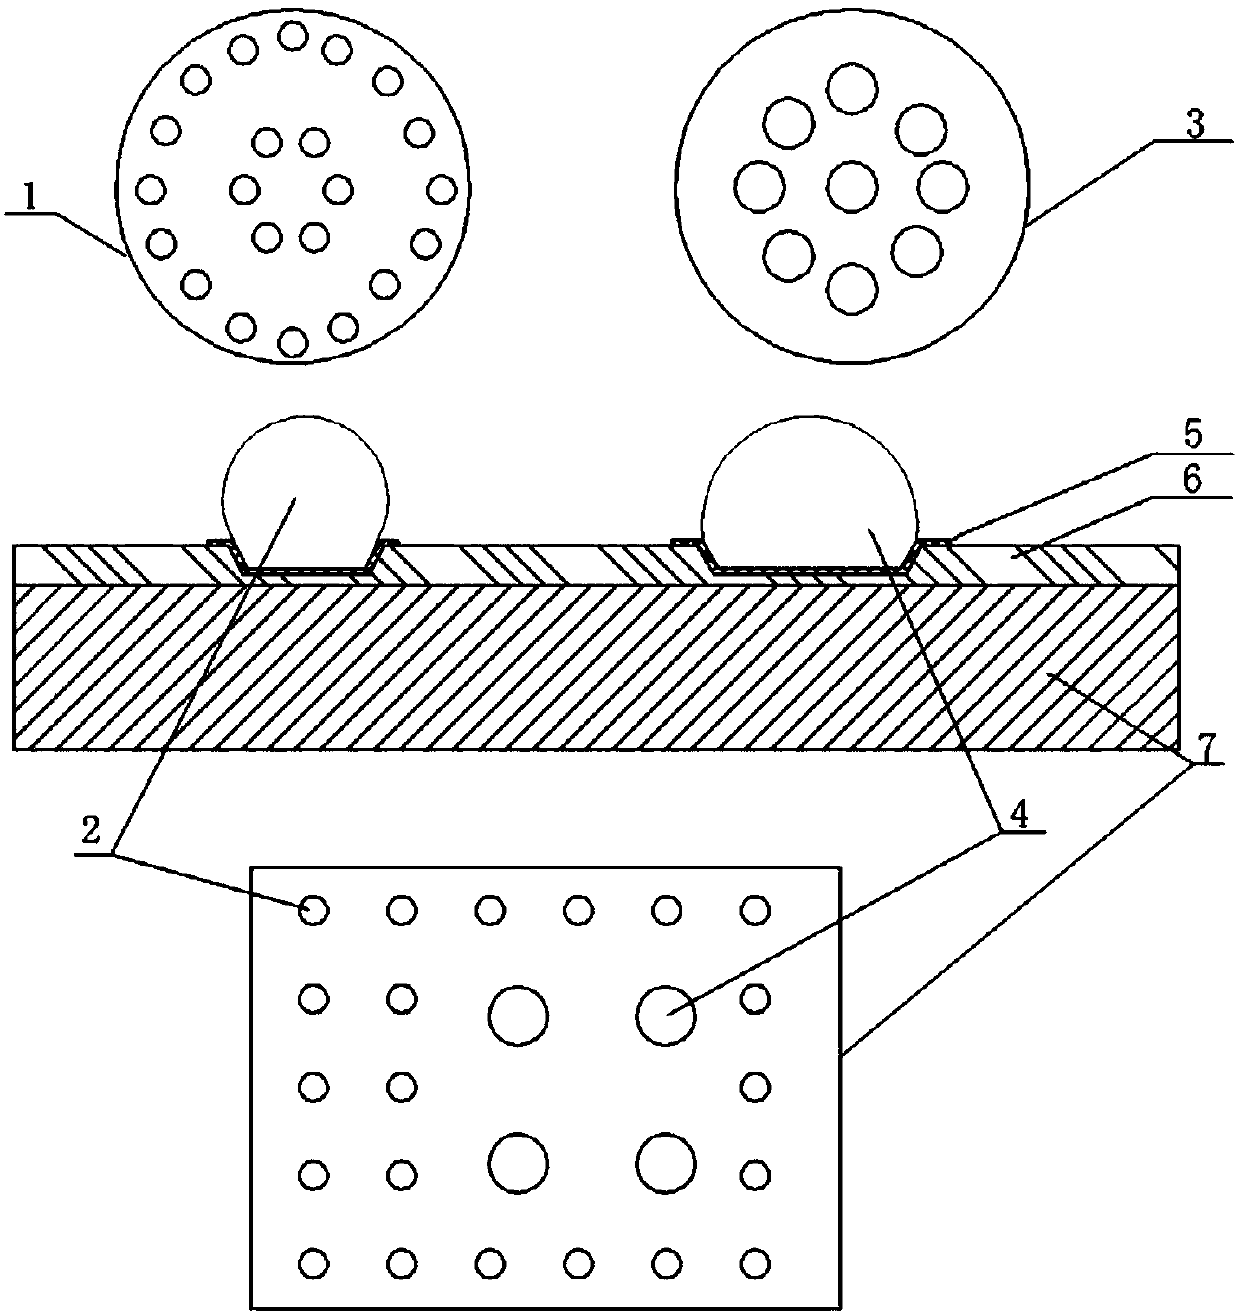 Method for preparing wafers having bumps with different diameters